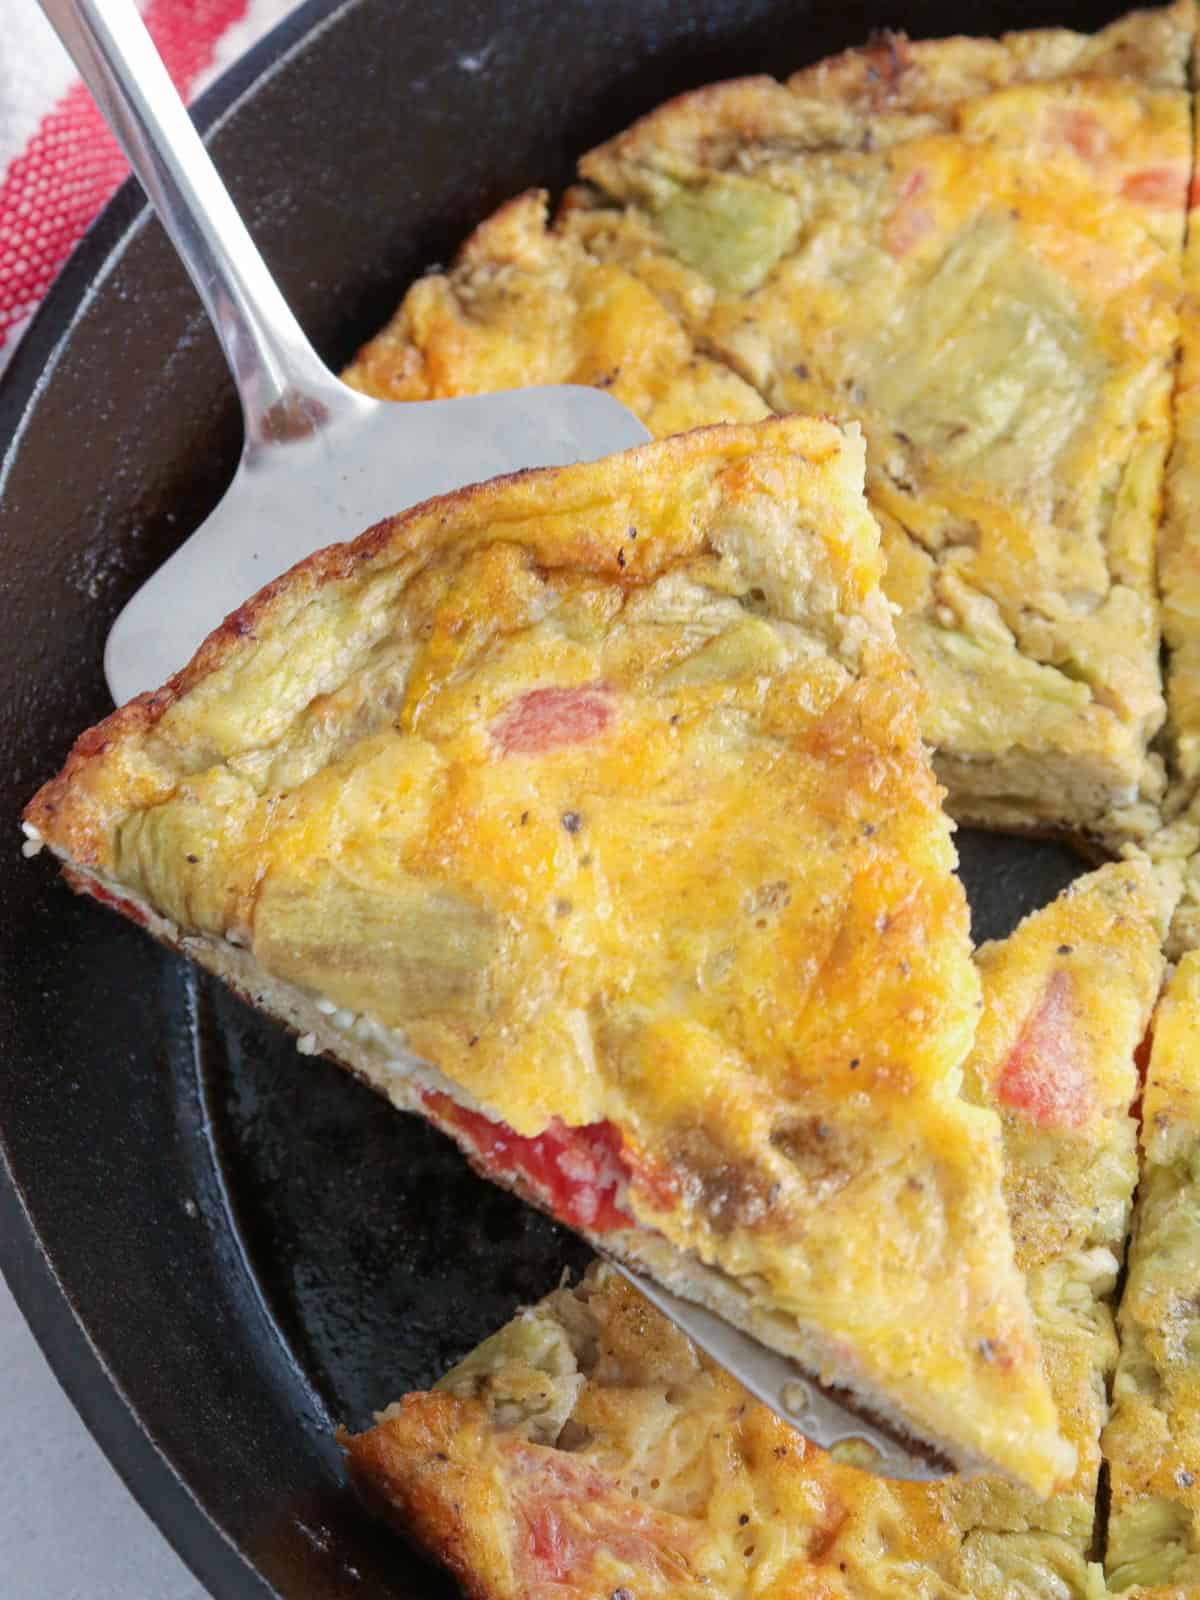 serving a slice of eggplant and tomato frittata from a cast iron skillet.